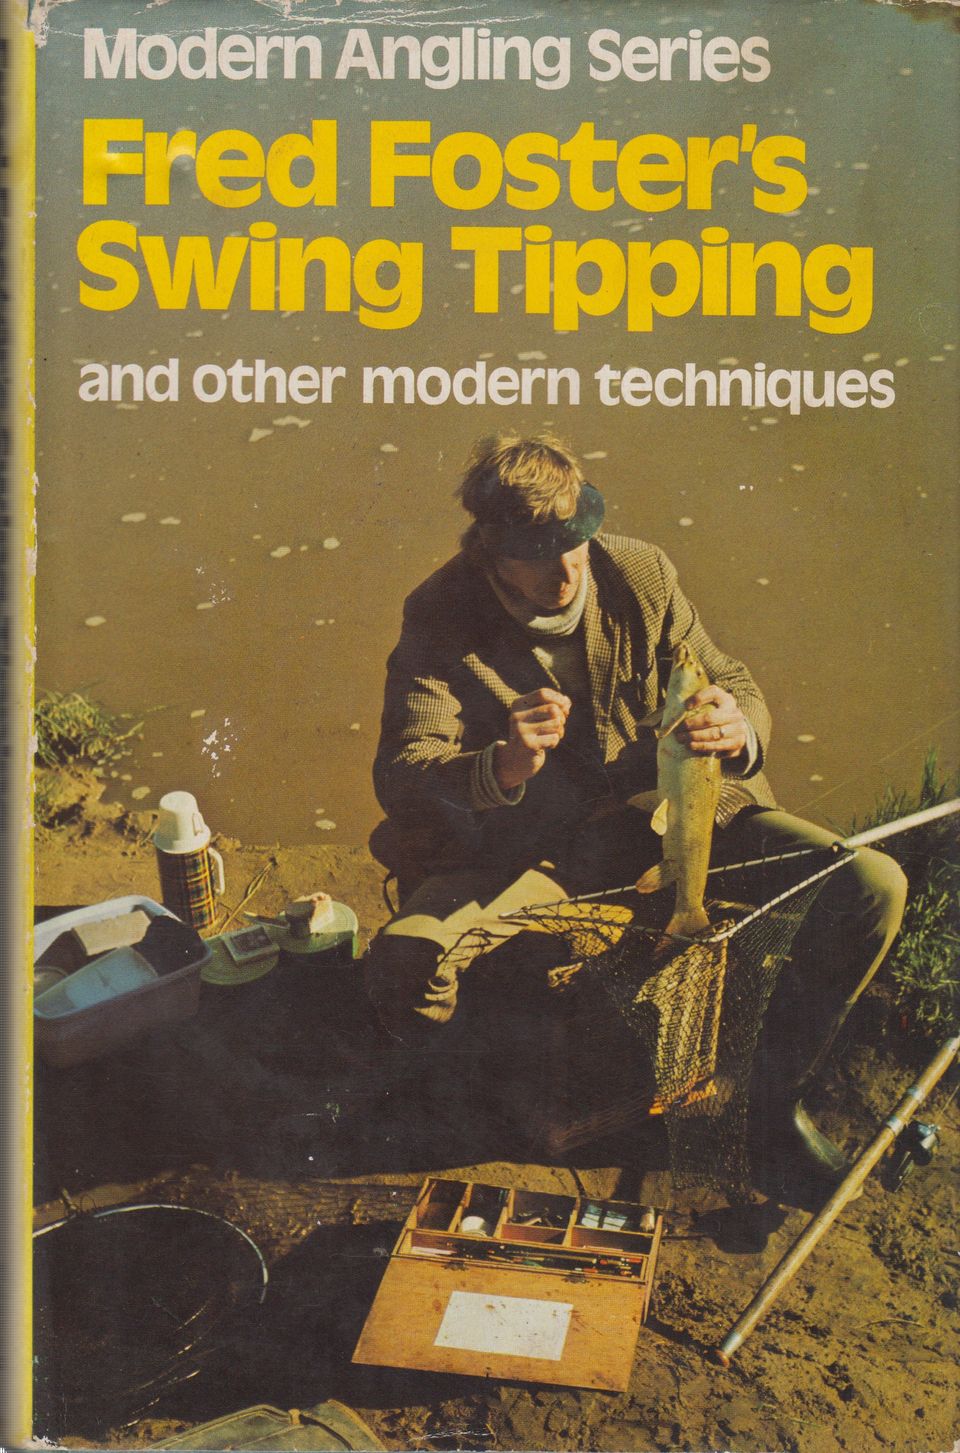 FRED FOSTER'S SWING TIPPING: AND OTHER MODERN TECHNIQUES. By Fred Foster. - Foster (Fred).